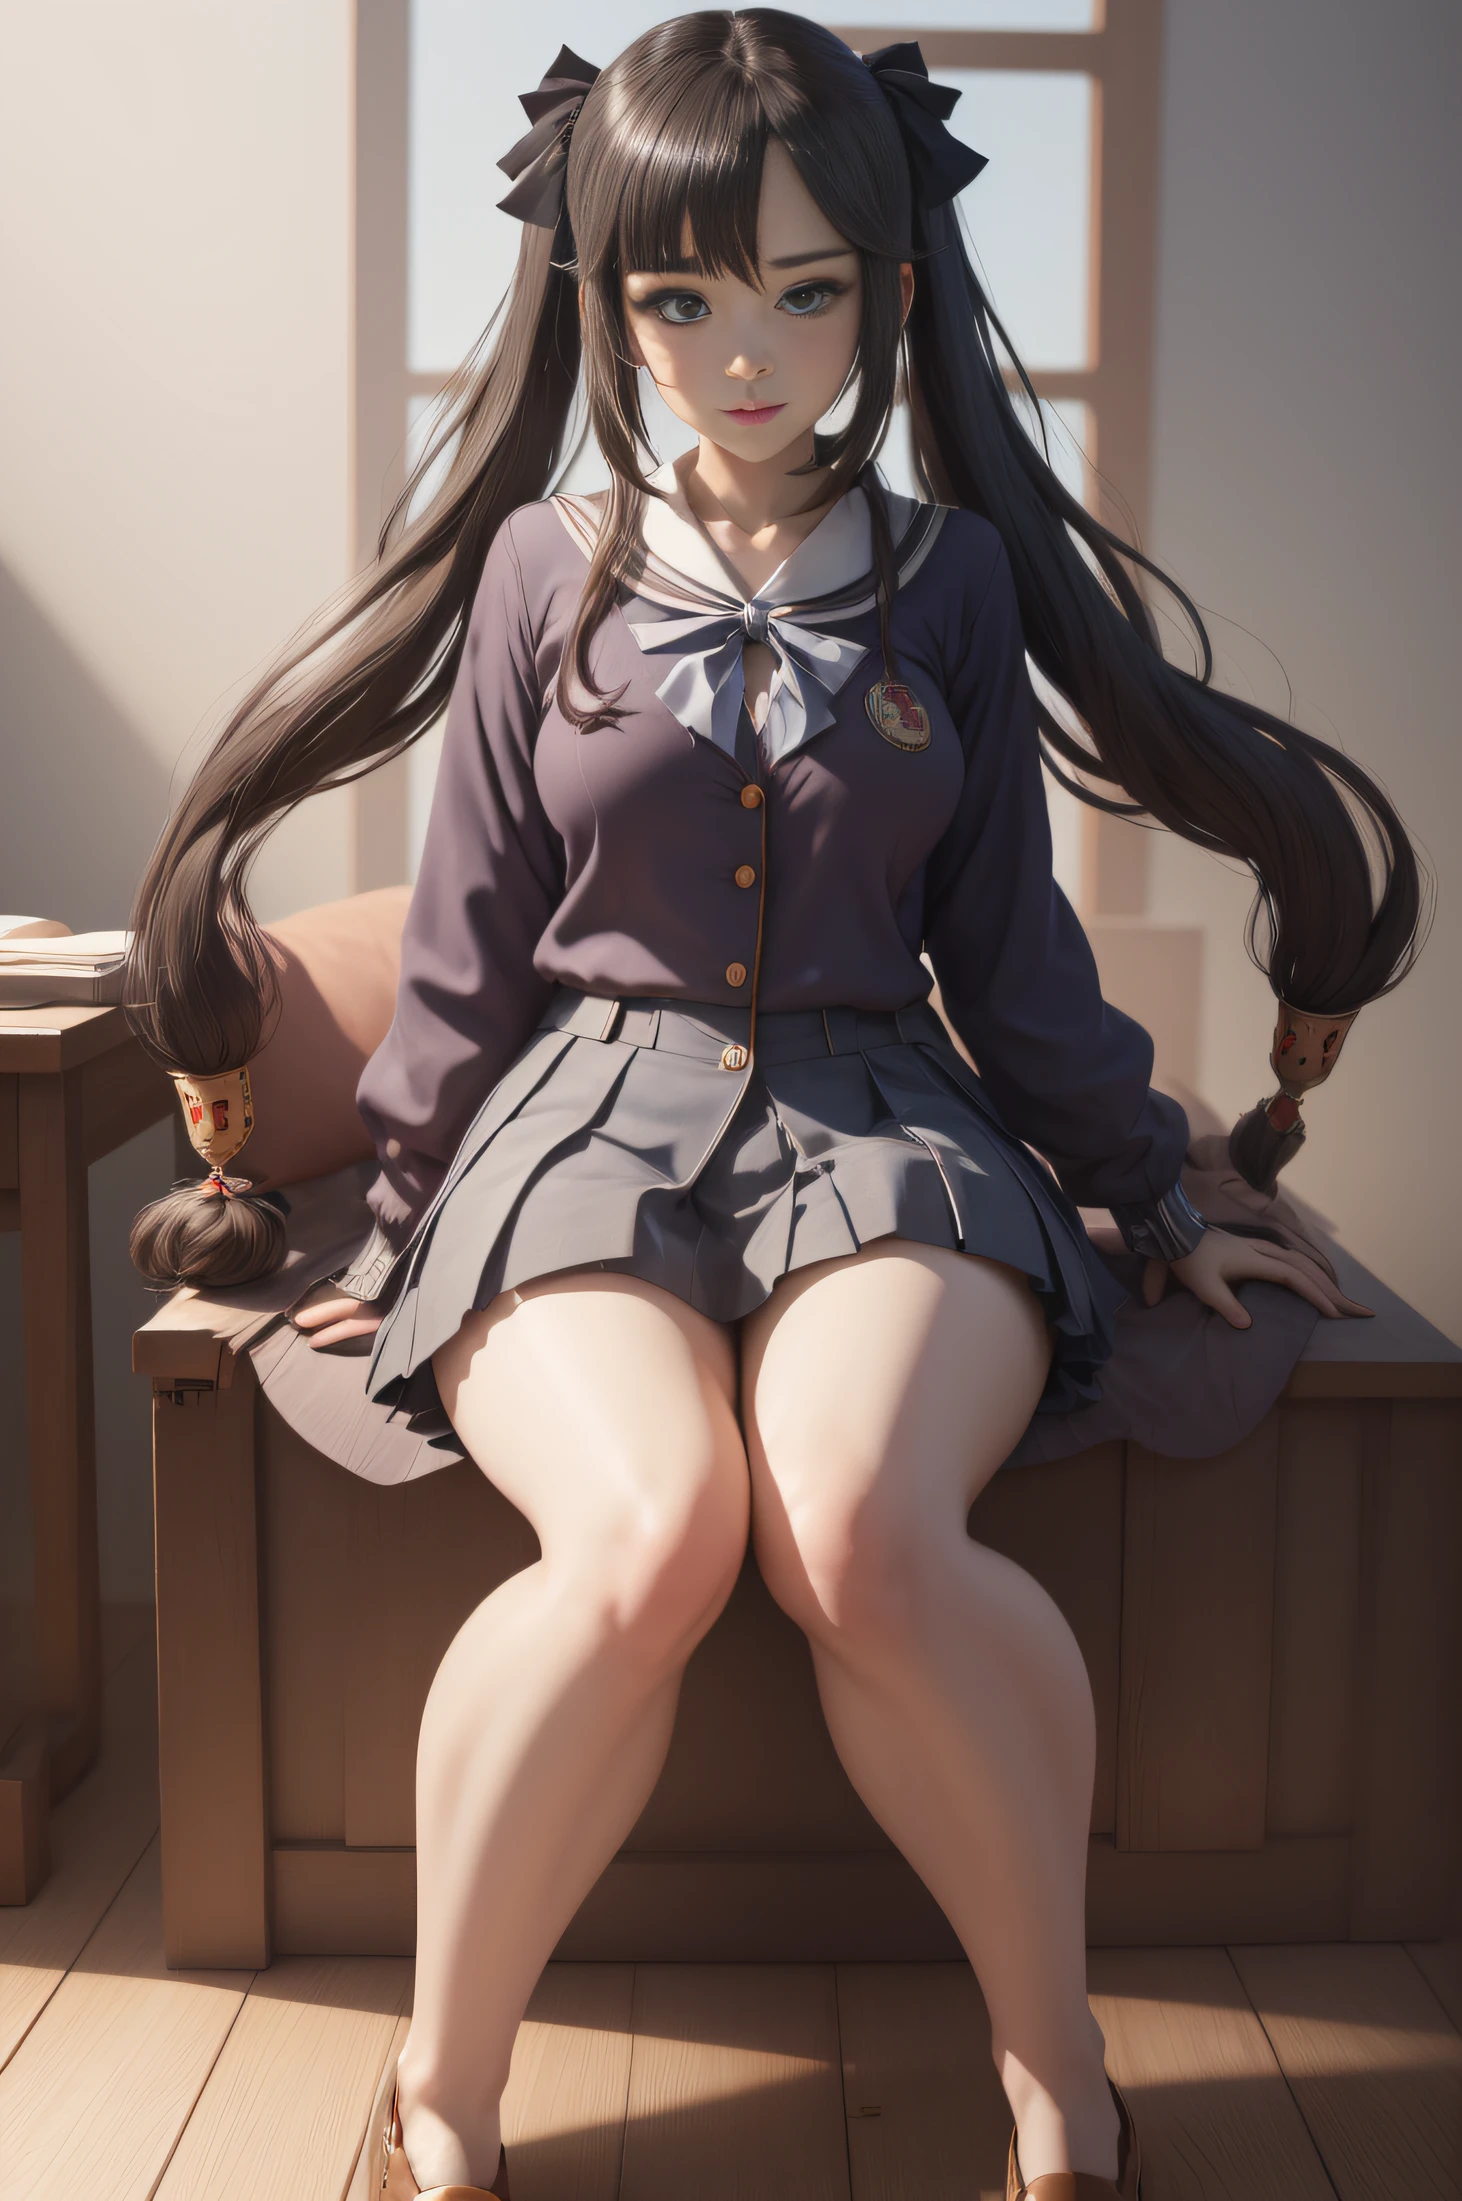 A girl in a school uniform squatted down, Девушка spread her legs, high , short skirt, The blouse is unbuttoned, You can see the underpants, little chest, Miniature figure, model figure, Slim waist, Embarrassment, sexuality, Cute beautiful anime woman, detailed digital anime art, beautiful anime girl, beautiful anime girl, Anime with small details, Best Quality, Masterpiece, Ultra-detailed, Beautiful, hight resolution, Original,CG 8K ультрареалистичный, perfect artwork, beatiful face, Face Clean, Skin, hyper realistic, Ultra Detailed, A detailed eye, dramatic  lighting, (Realistic) Realistic, Full HD, Best Quality, Best Quality, Beautiful lighting, (8k wallpaper of extremely detailed CG unit), High Details, sharp-focus, The art of dramatic and photorealistic painting, beautiful smile,